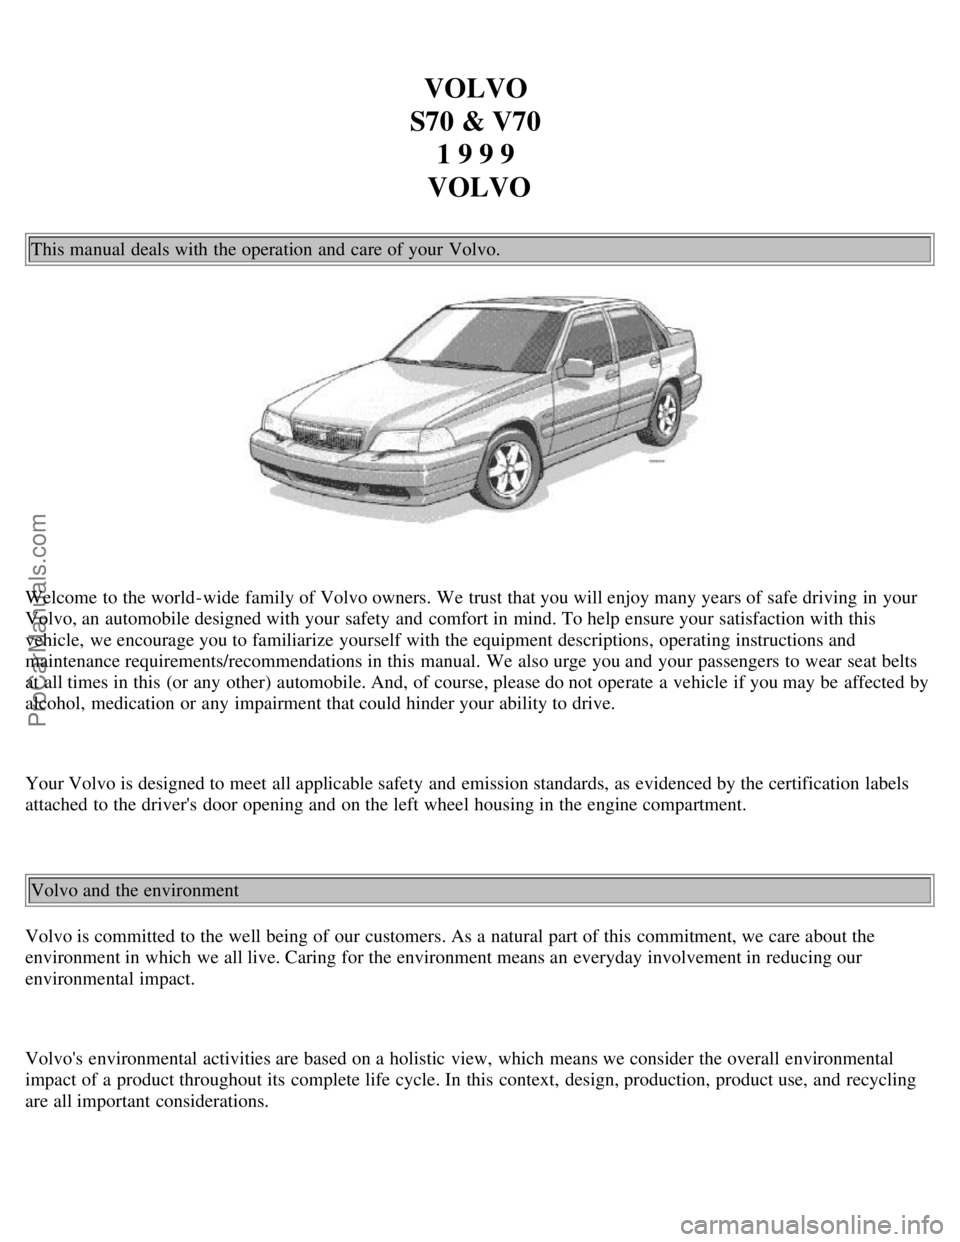 VOLVO V70 1999  Owners Manual VOLVO 
S70 & V70  1 9 9 9 
VOLVO
This manual  deals with the operation and  care of your Volvo.
Welcome to the world-wide  family of Volvo owners. We trust that you will enjoy many years of safe drivi